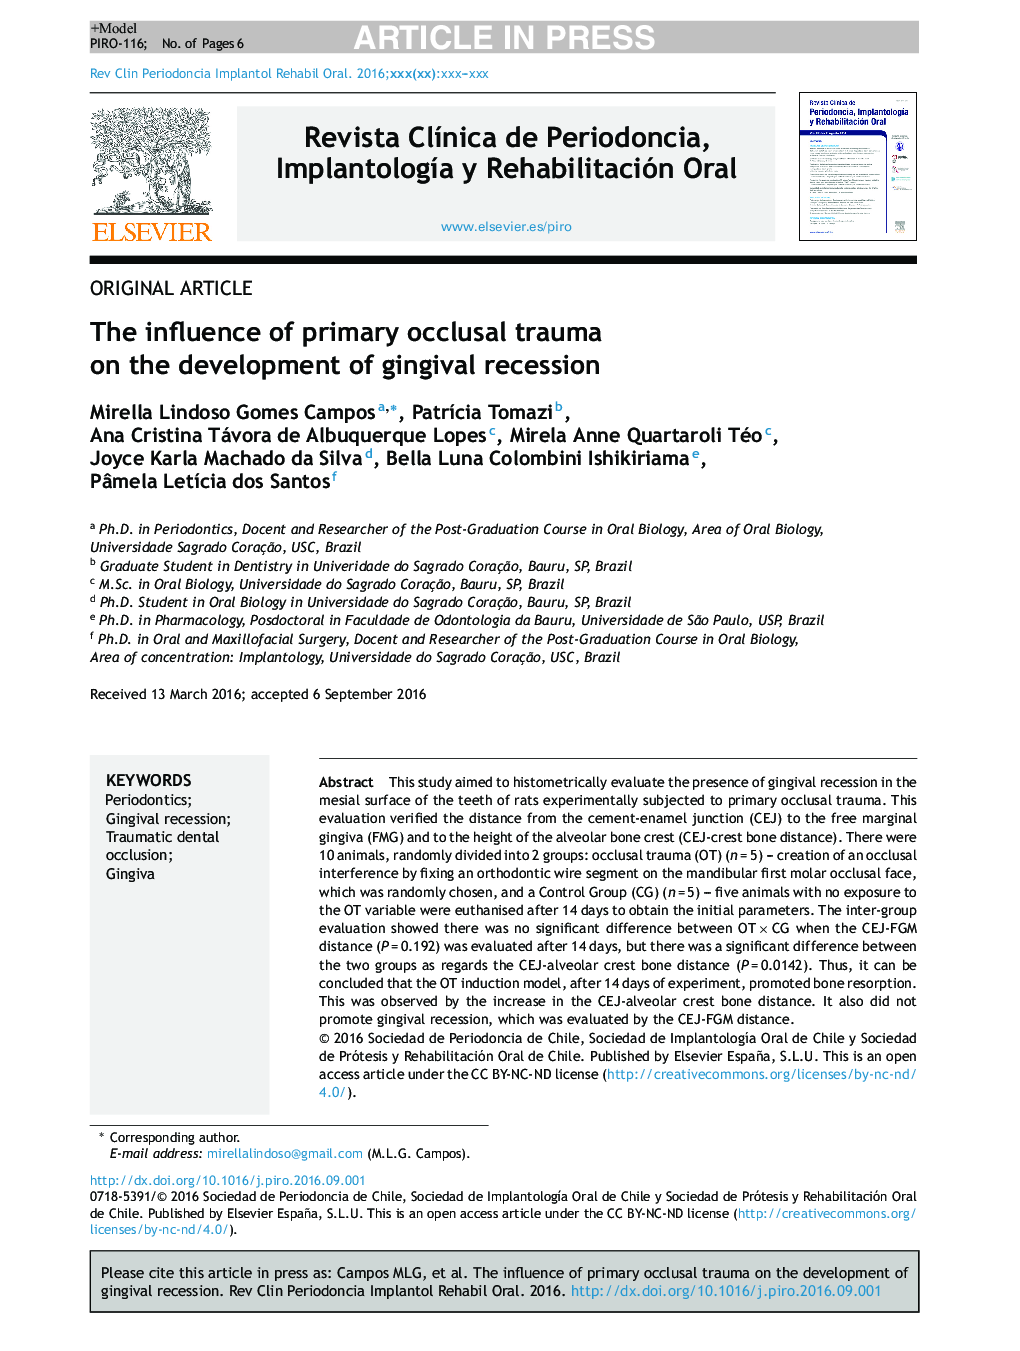 The influence of primary occlusal trauma on the development of gingival recession